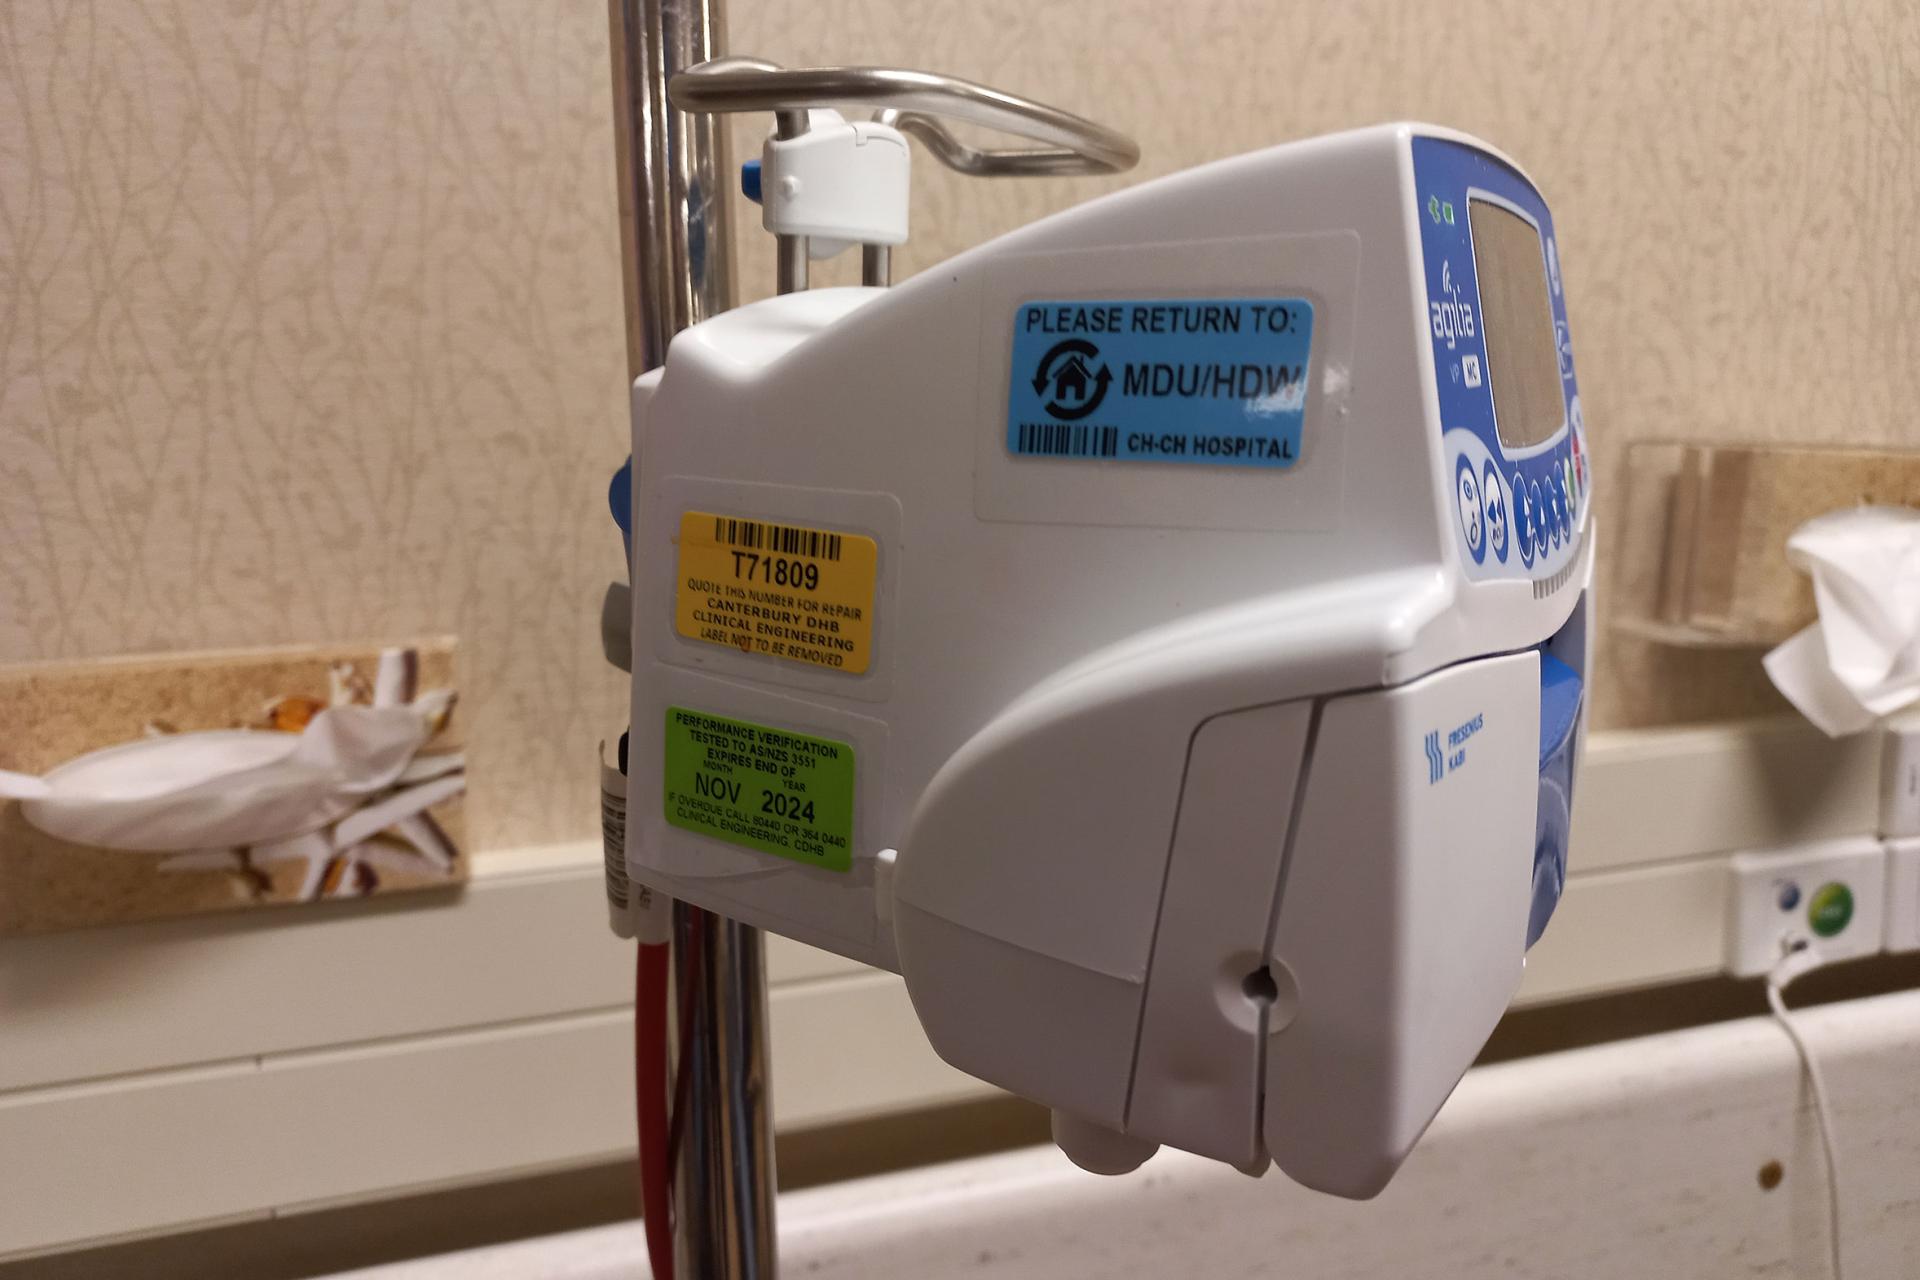 Labels printed on a medical machine